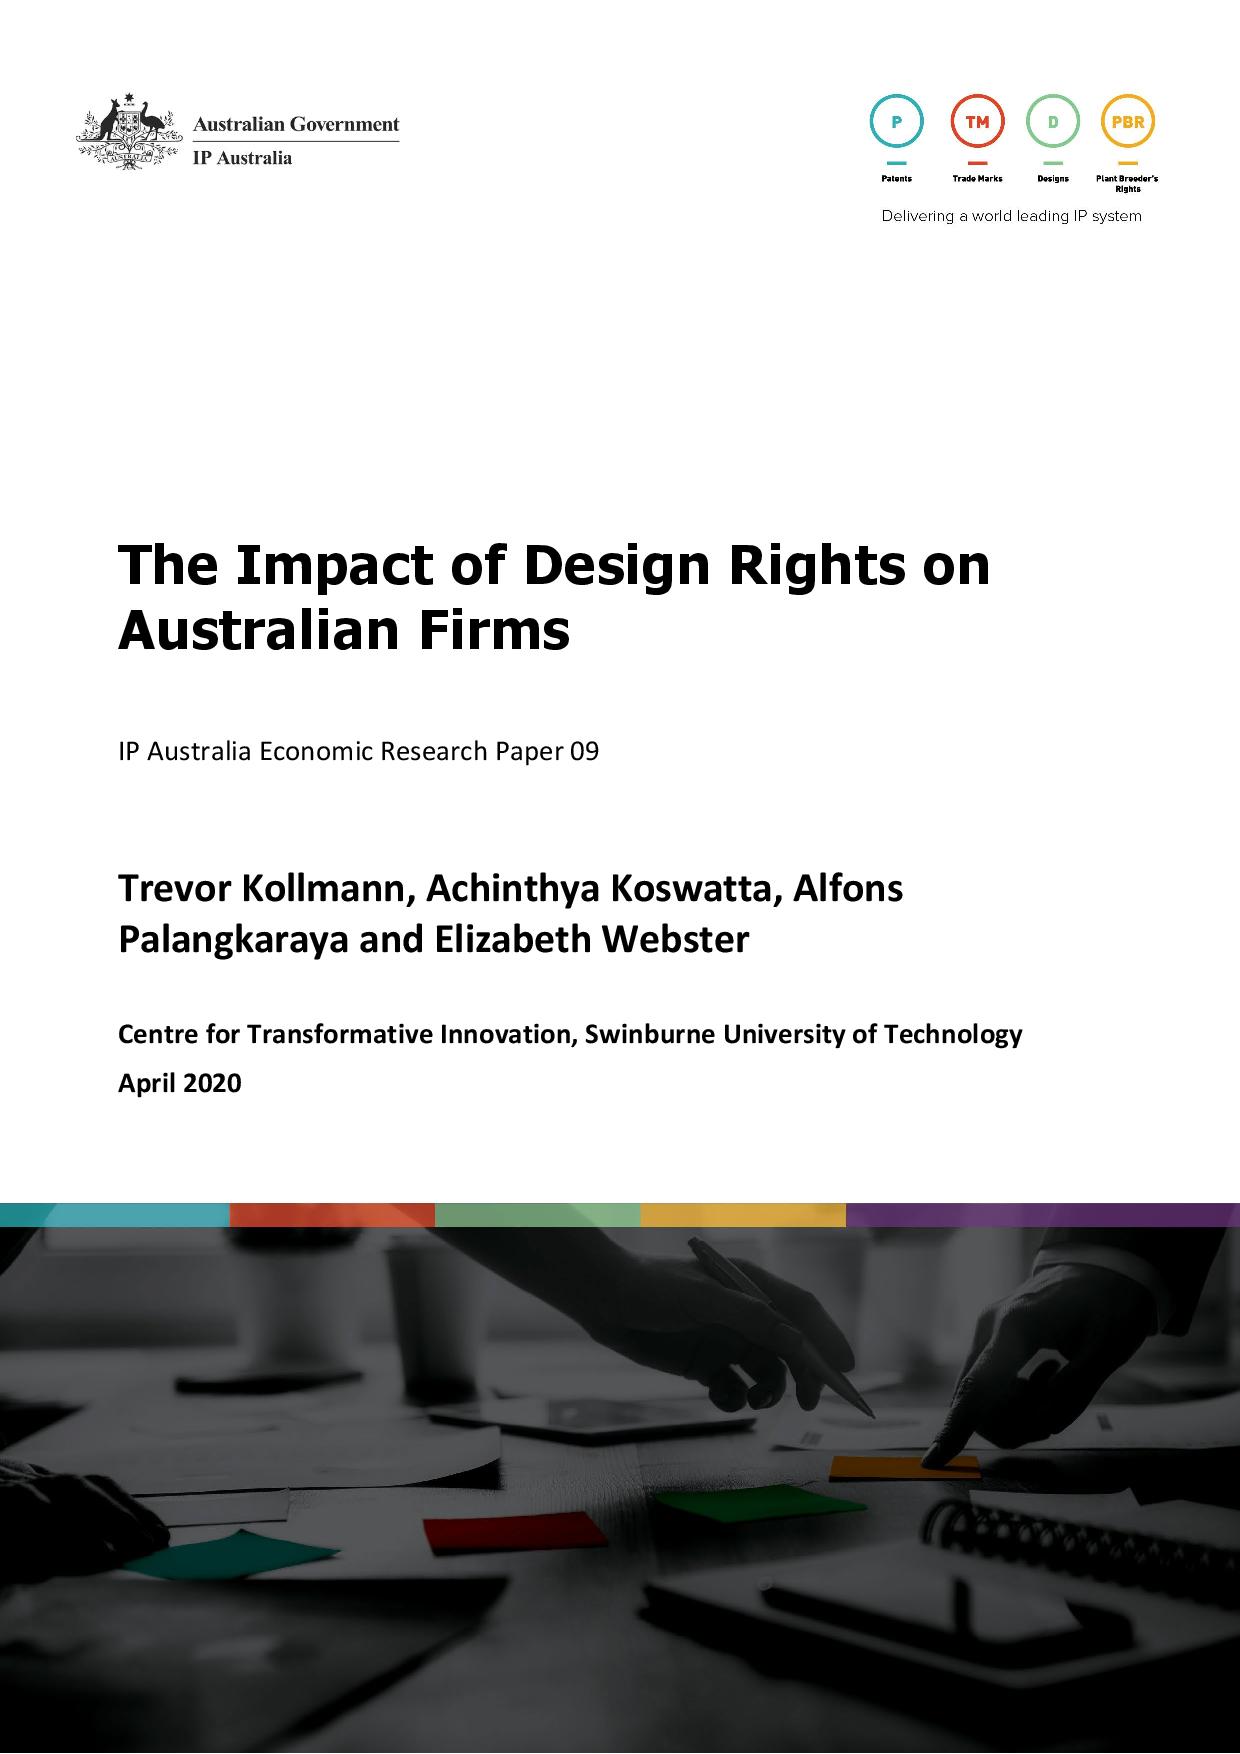 The Impact of Design Rights on Australian Firms